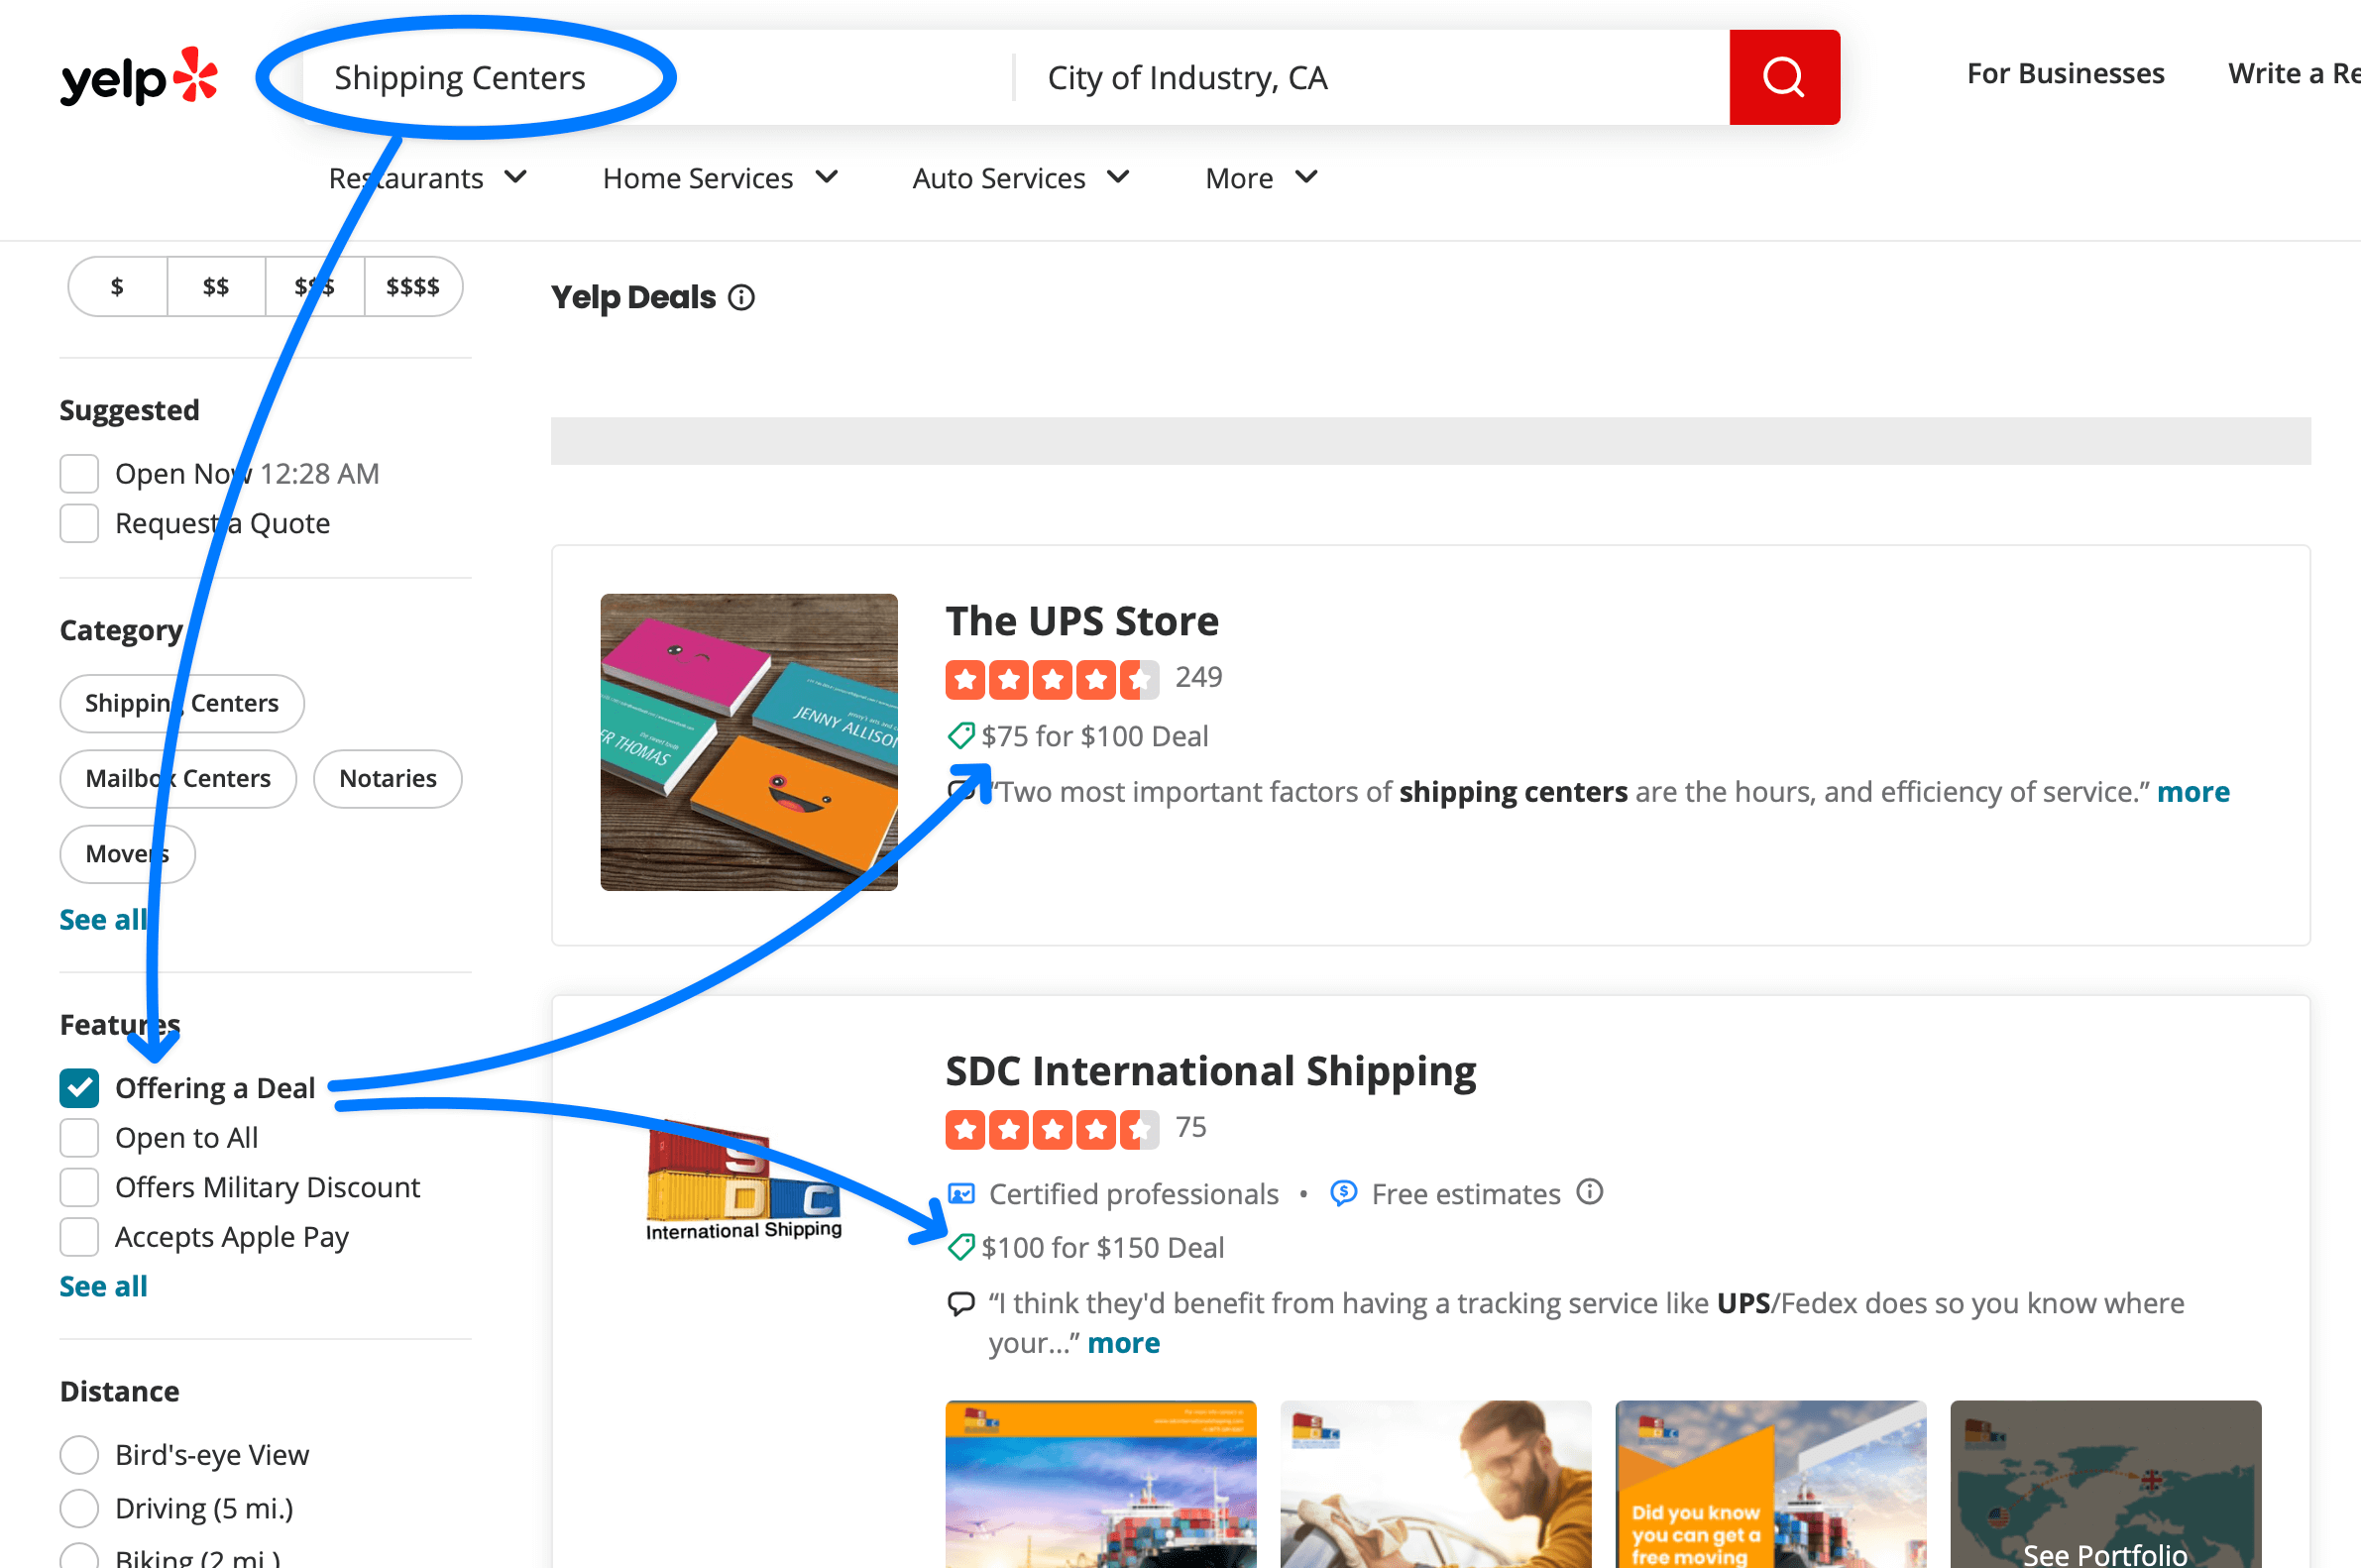 yelp offering a deal filter